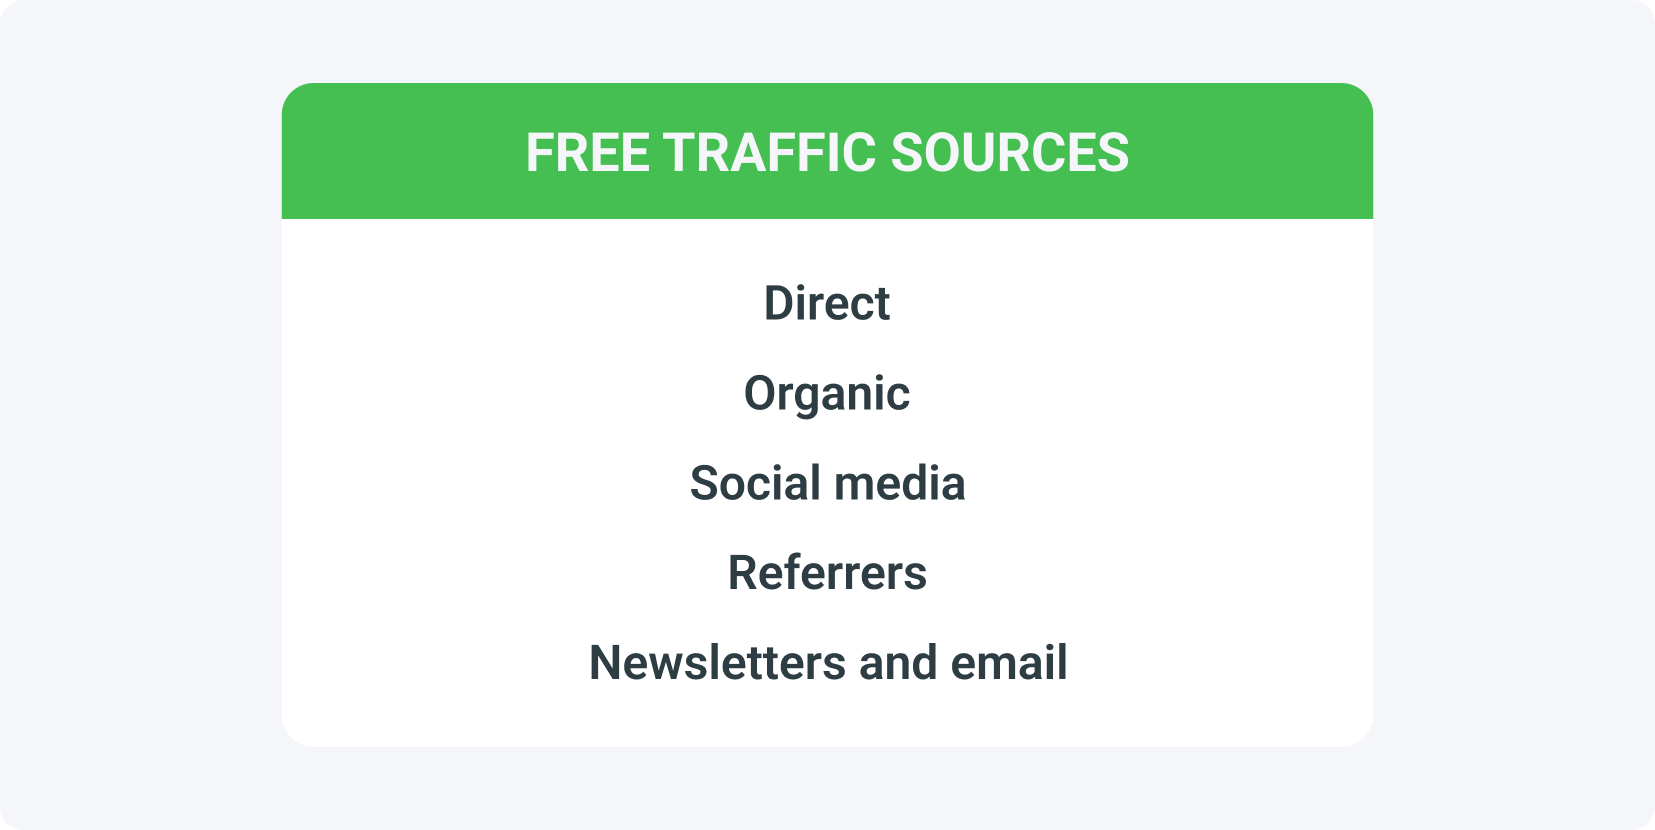 Free sources of affiliate marketing traffic include direct traffic, organic traffic, social media, referral sites, newsletters and emails.